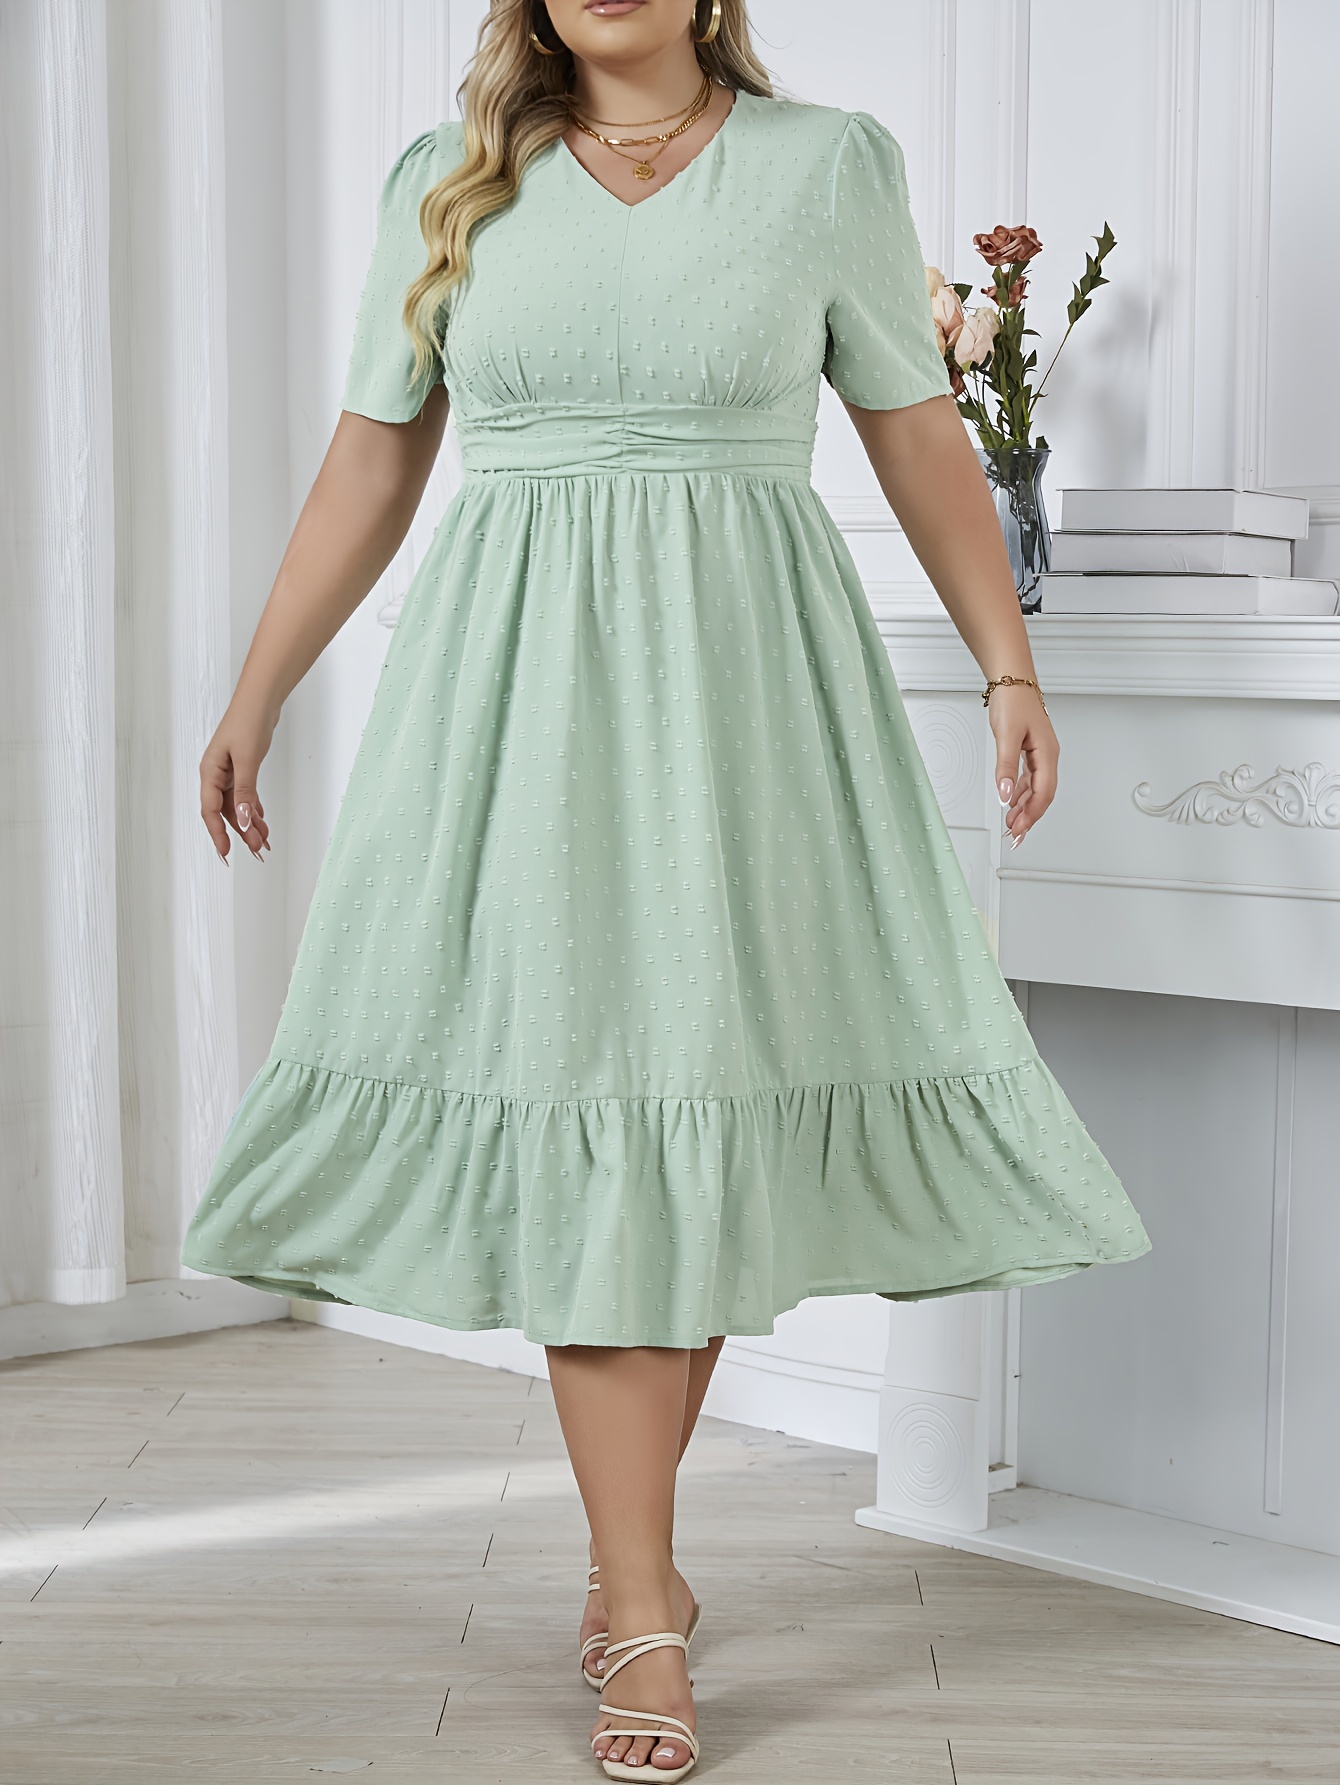 Plus Size Casual Dress, Women's Plus Solid Contrast Guipure Lace Trim Cap  Sleeve Stand Collar A-line Smock Dress